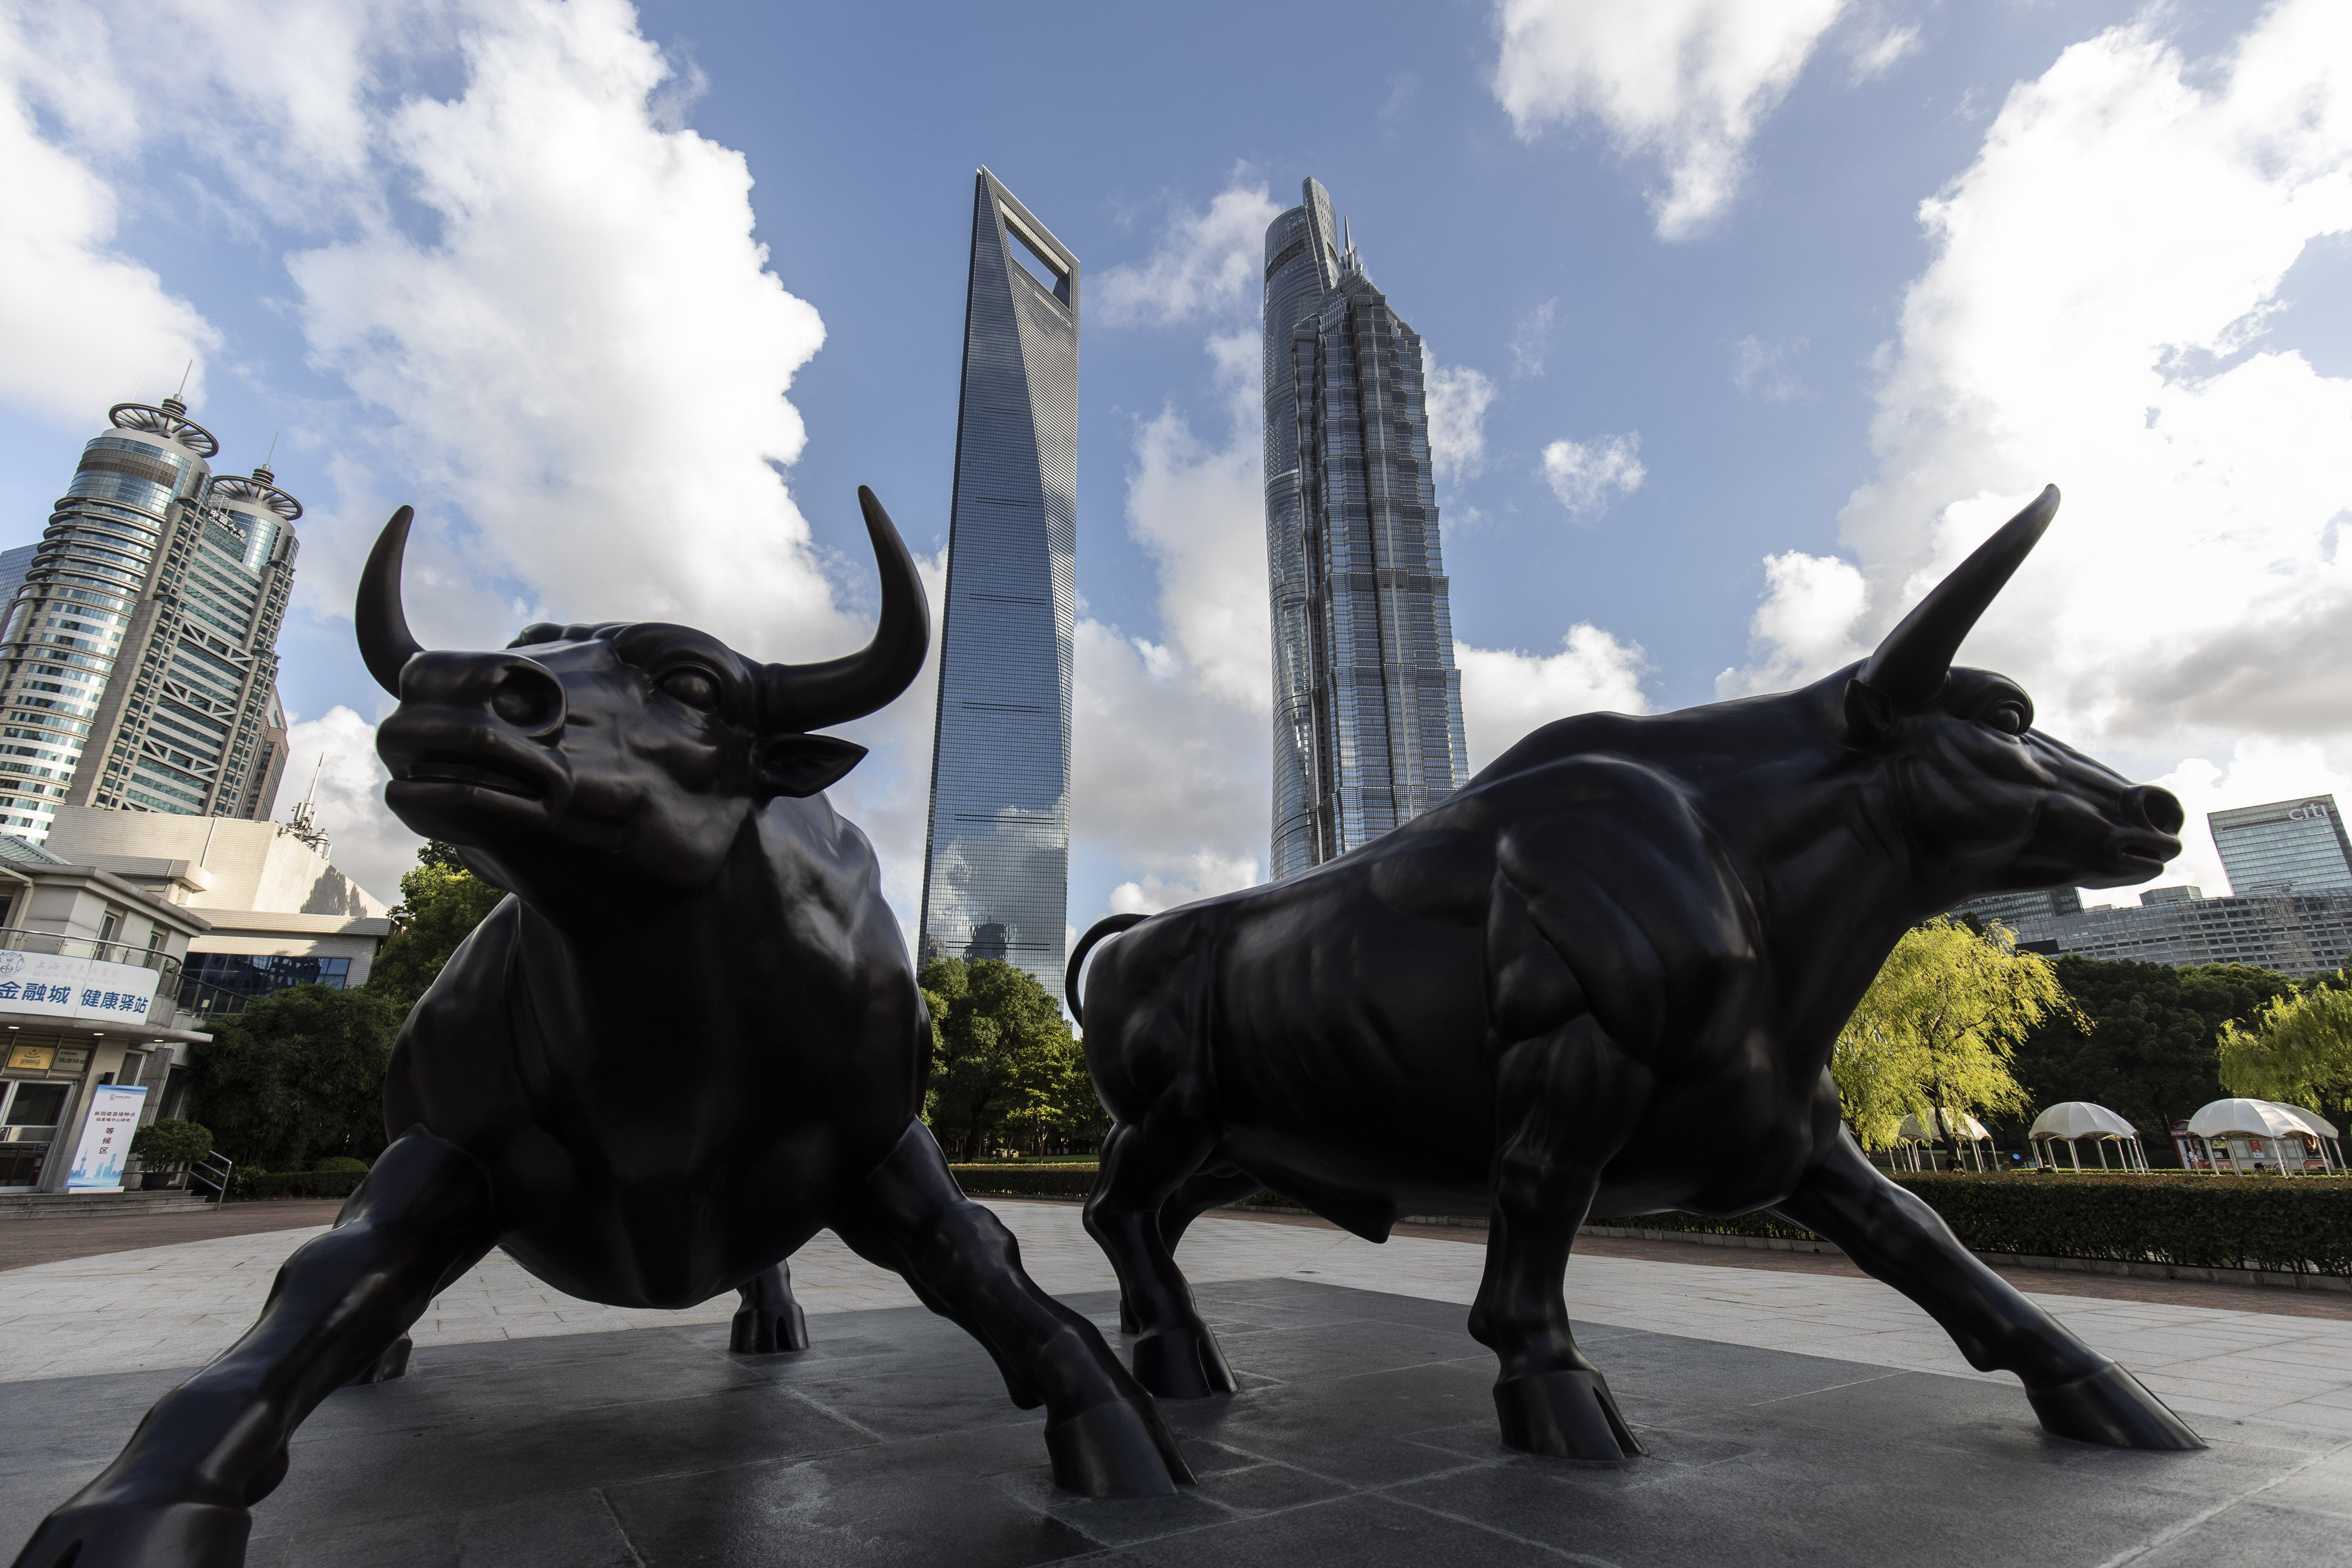 A sculpture of bulls in the Lujiazui business district in Shanghai, China, on Tuesday, July 20, 2021. Banks in China kept the benchmark loan rate unchanged, indicating that the central bank is continuing to keep policy stable despite a recent surprise move to add liquidity to the financial system. Photographer: Qilai Shen/Bloomberg